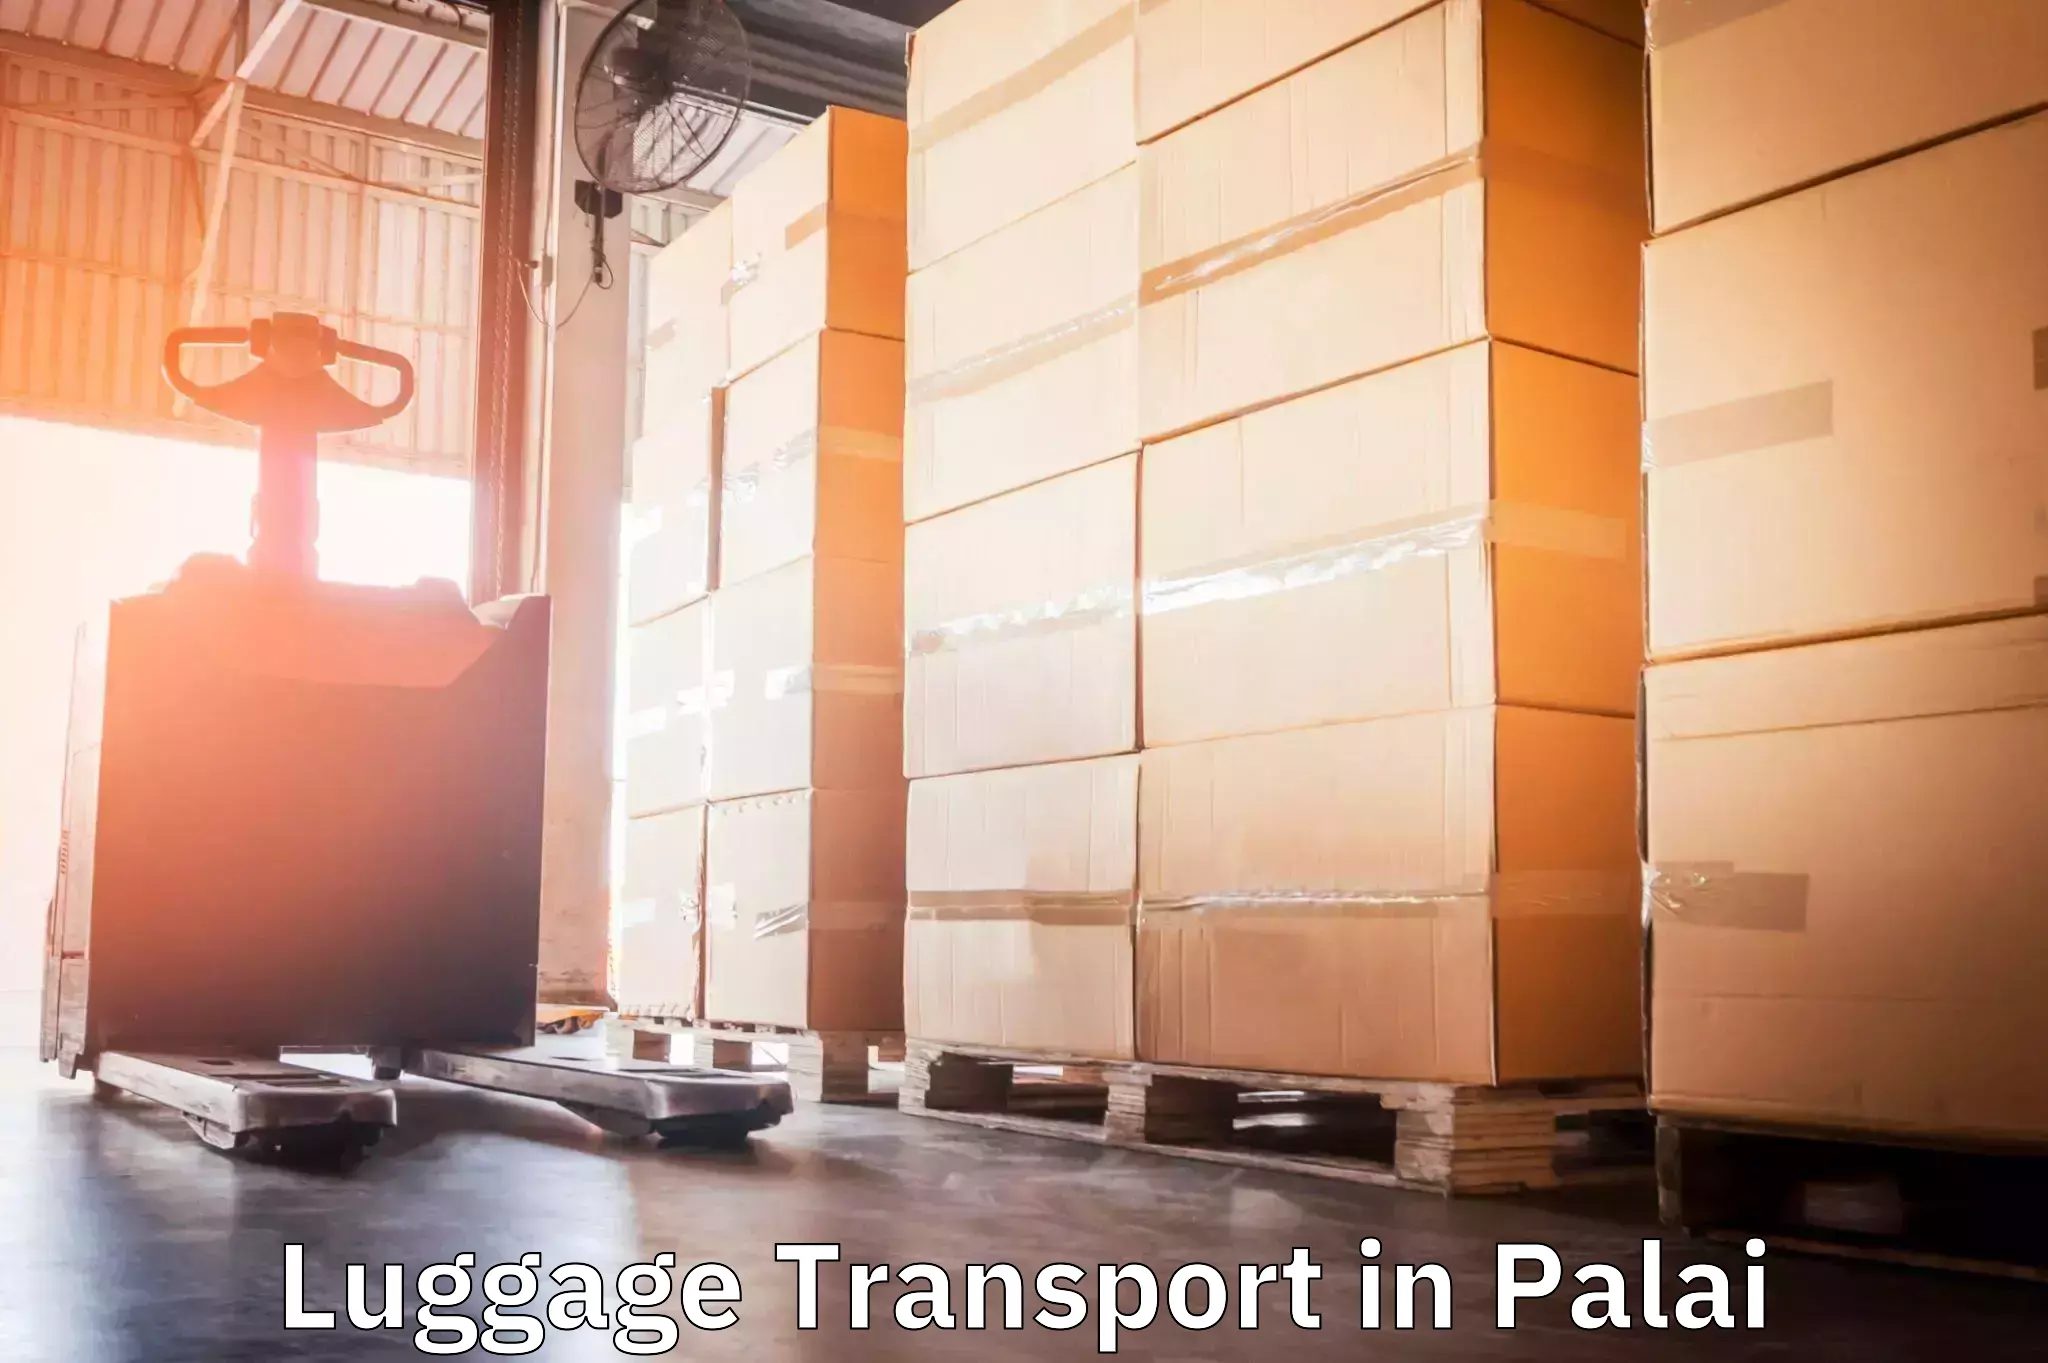 Luggage transport consultancy in Palai